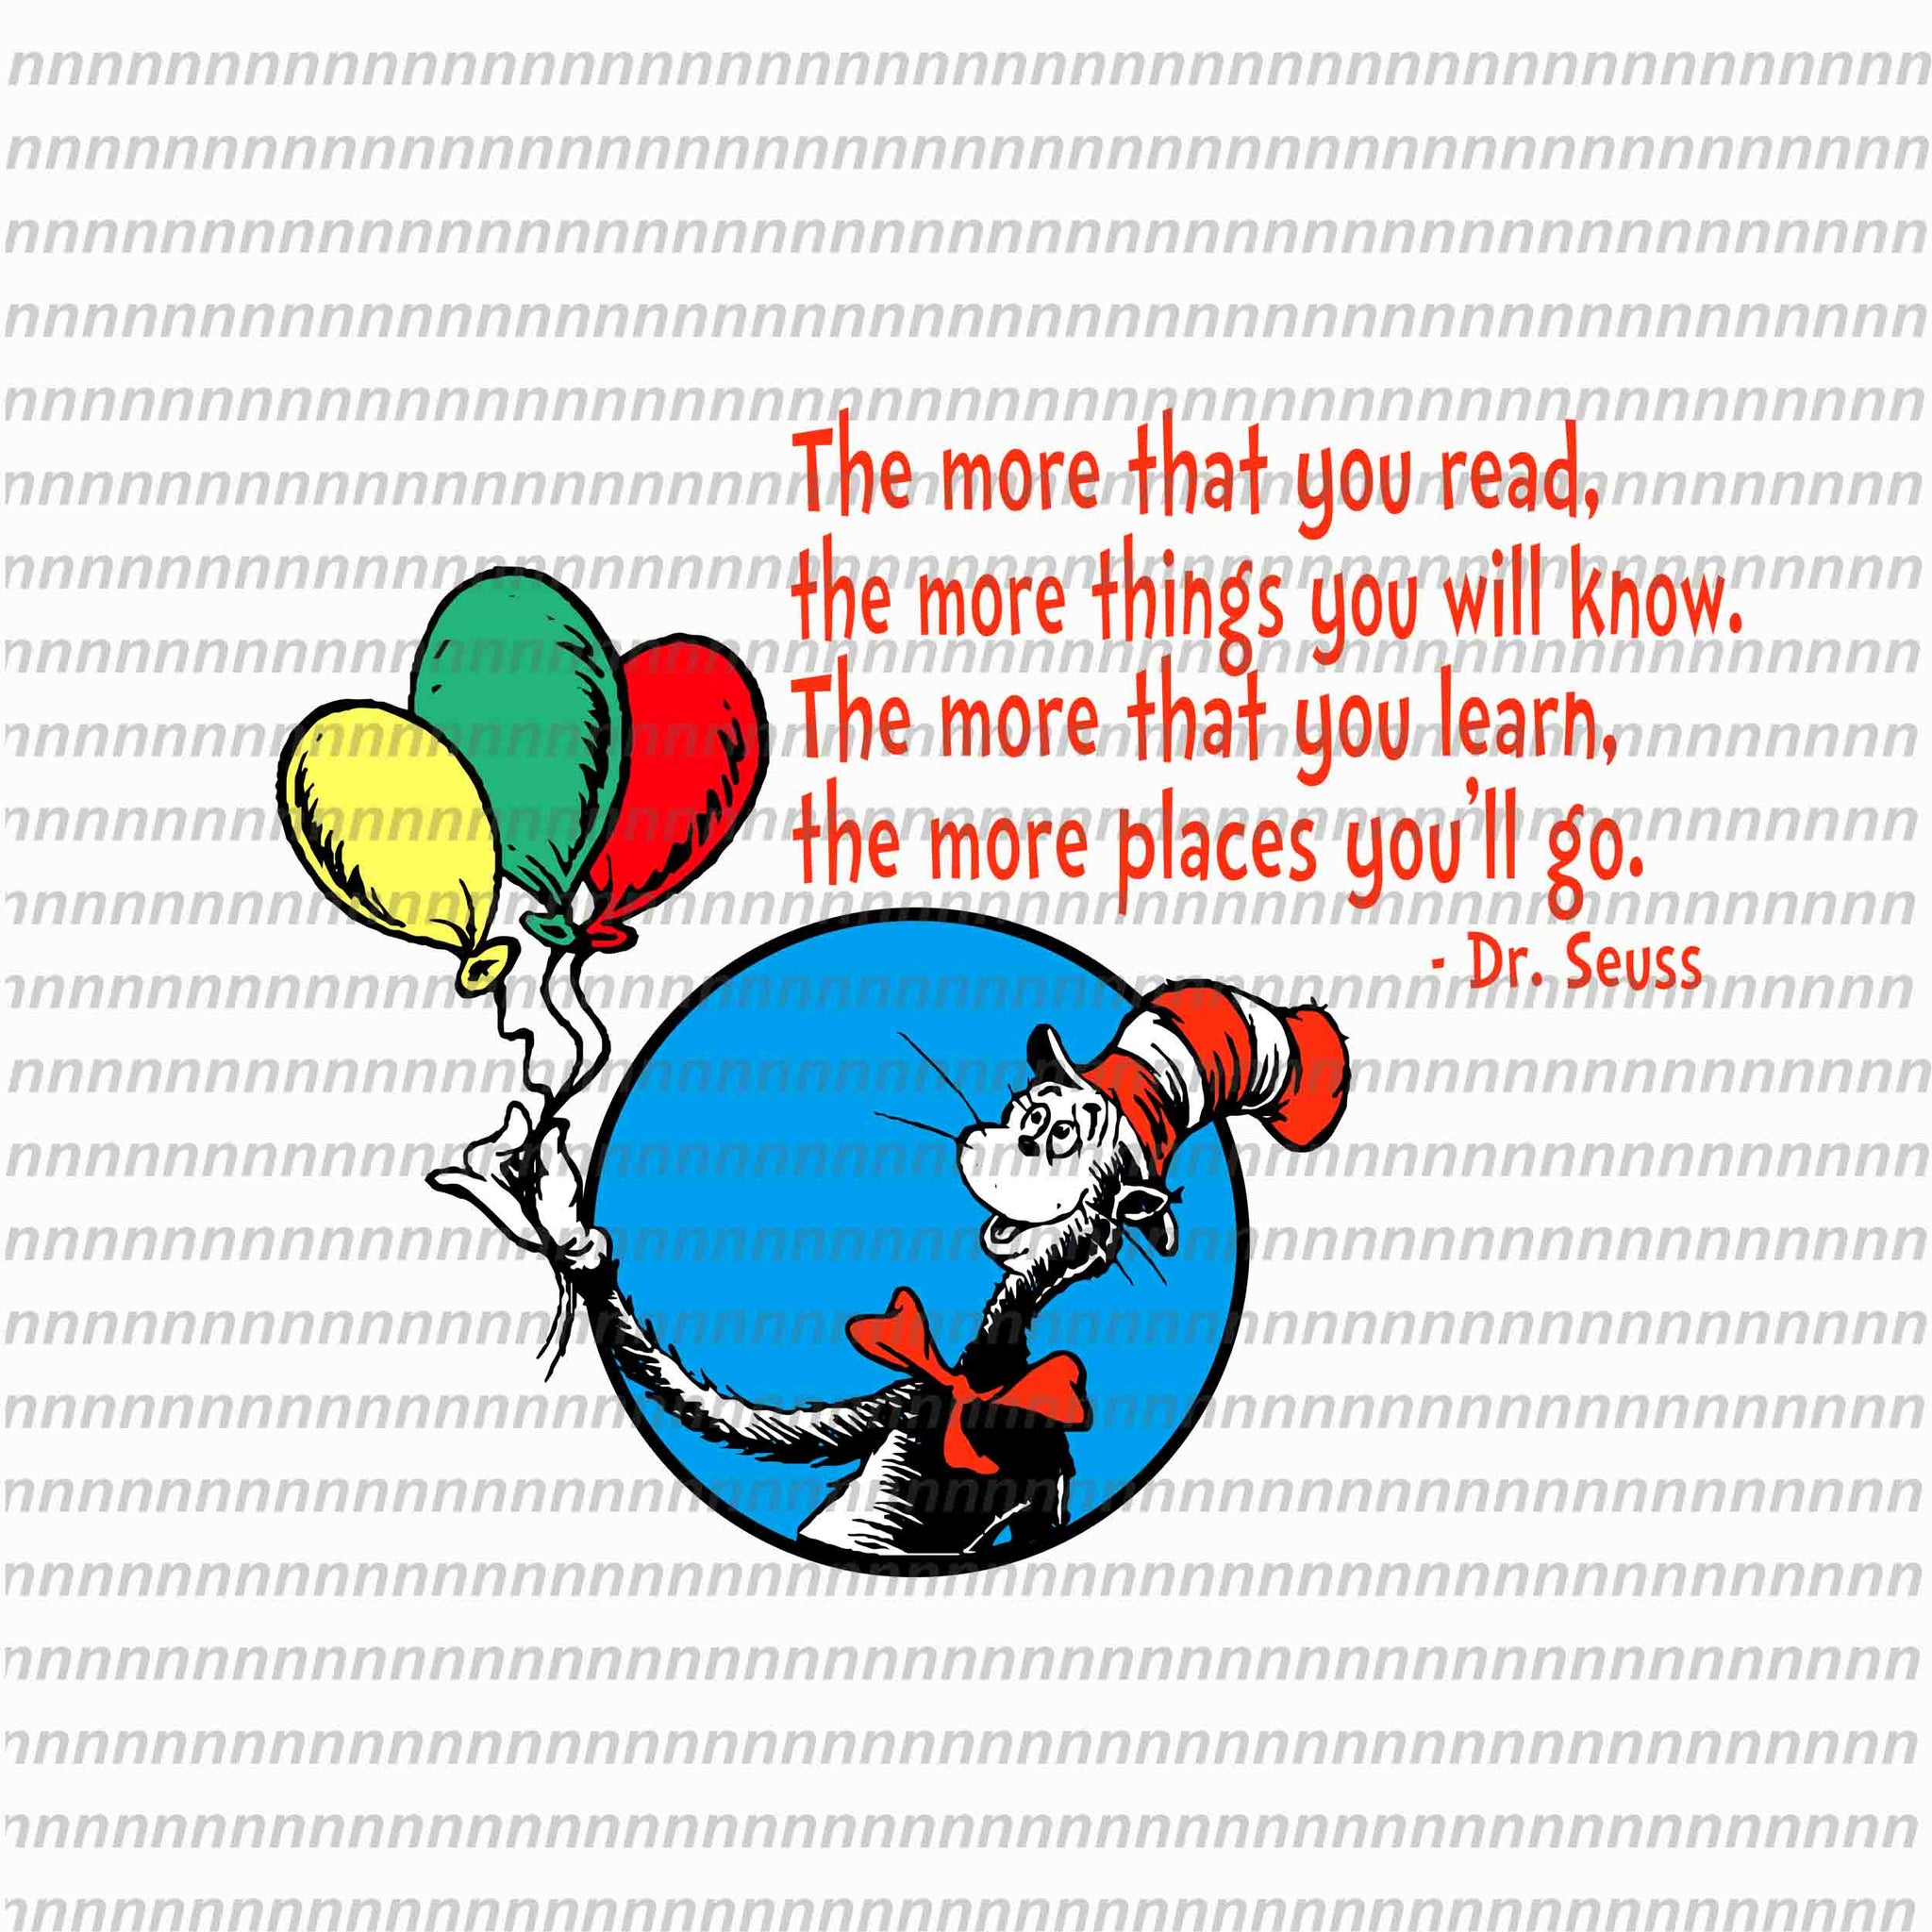 The more that you read the more things will know, dr seuss svg,dr seuss vector, dr seuss quote, dr seuss design, Cat in the hat svg, thing 1 thing 2 thing 3, svg, png, dxf, eps file